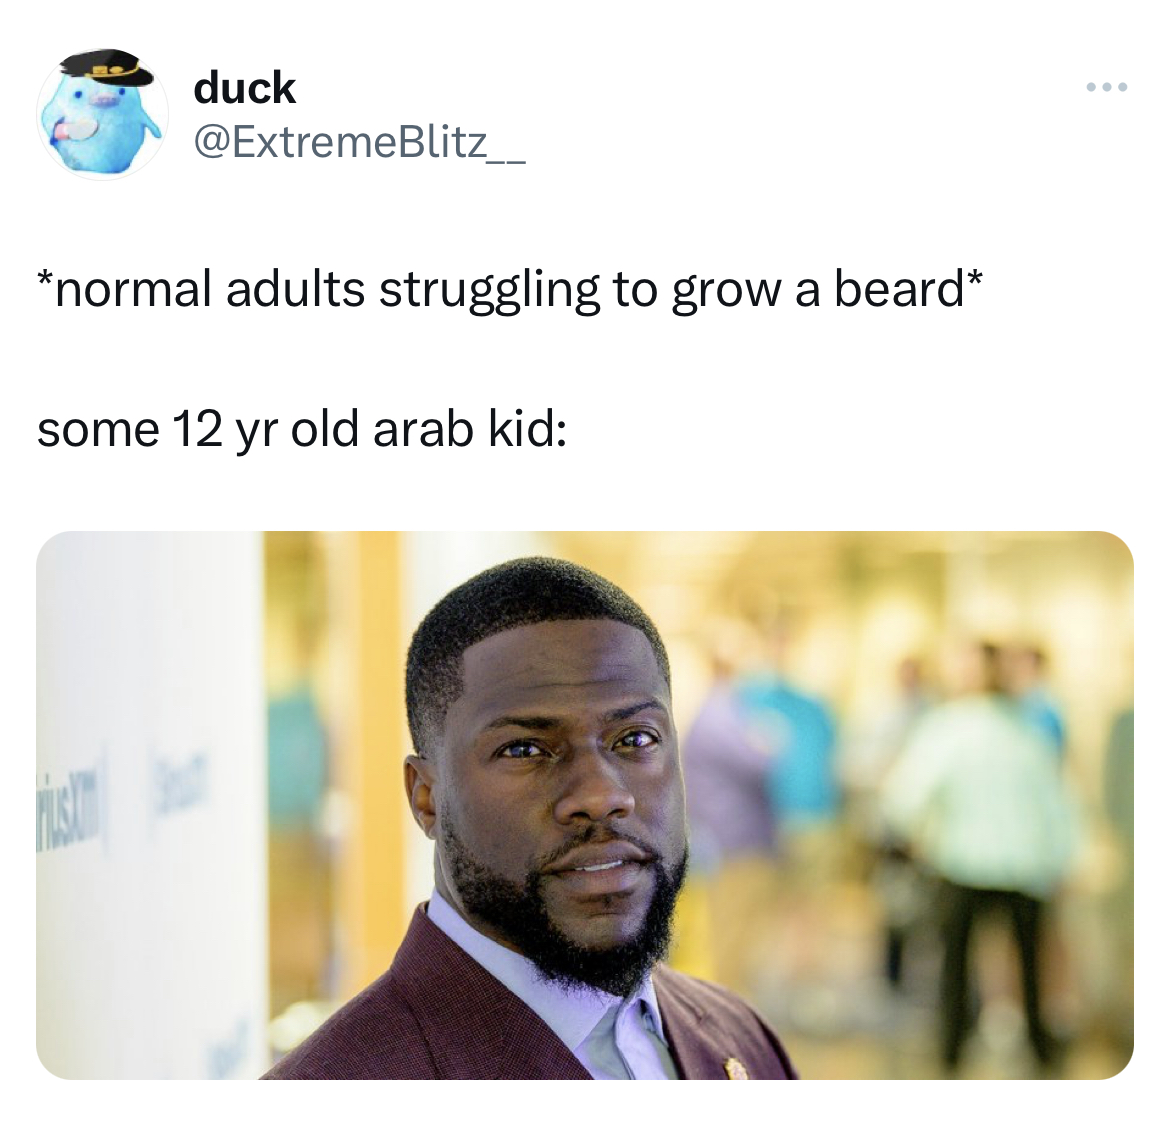 savage tweets - kevin hart profile - duck Husk normal adults struggling to grow a beard some 12 yr old arab kid ...